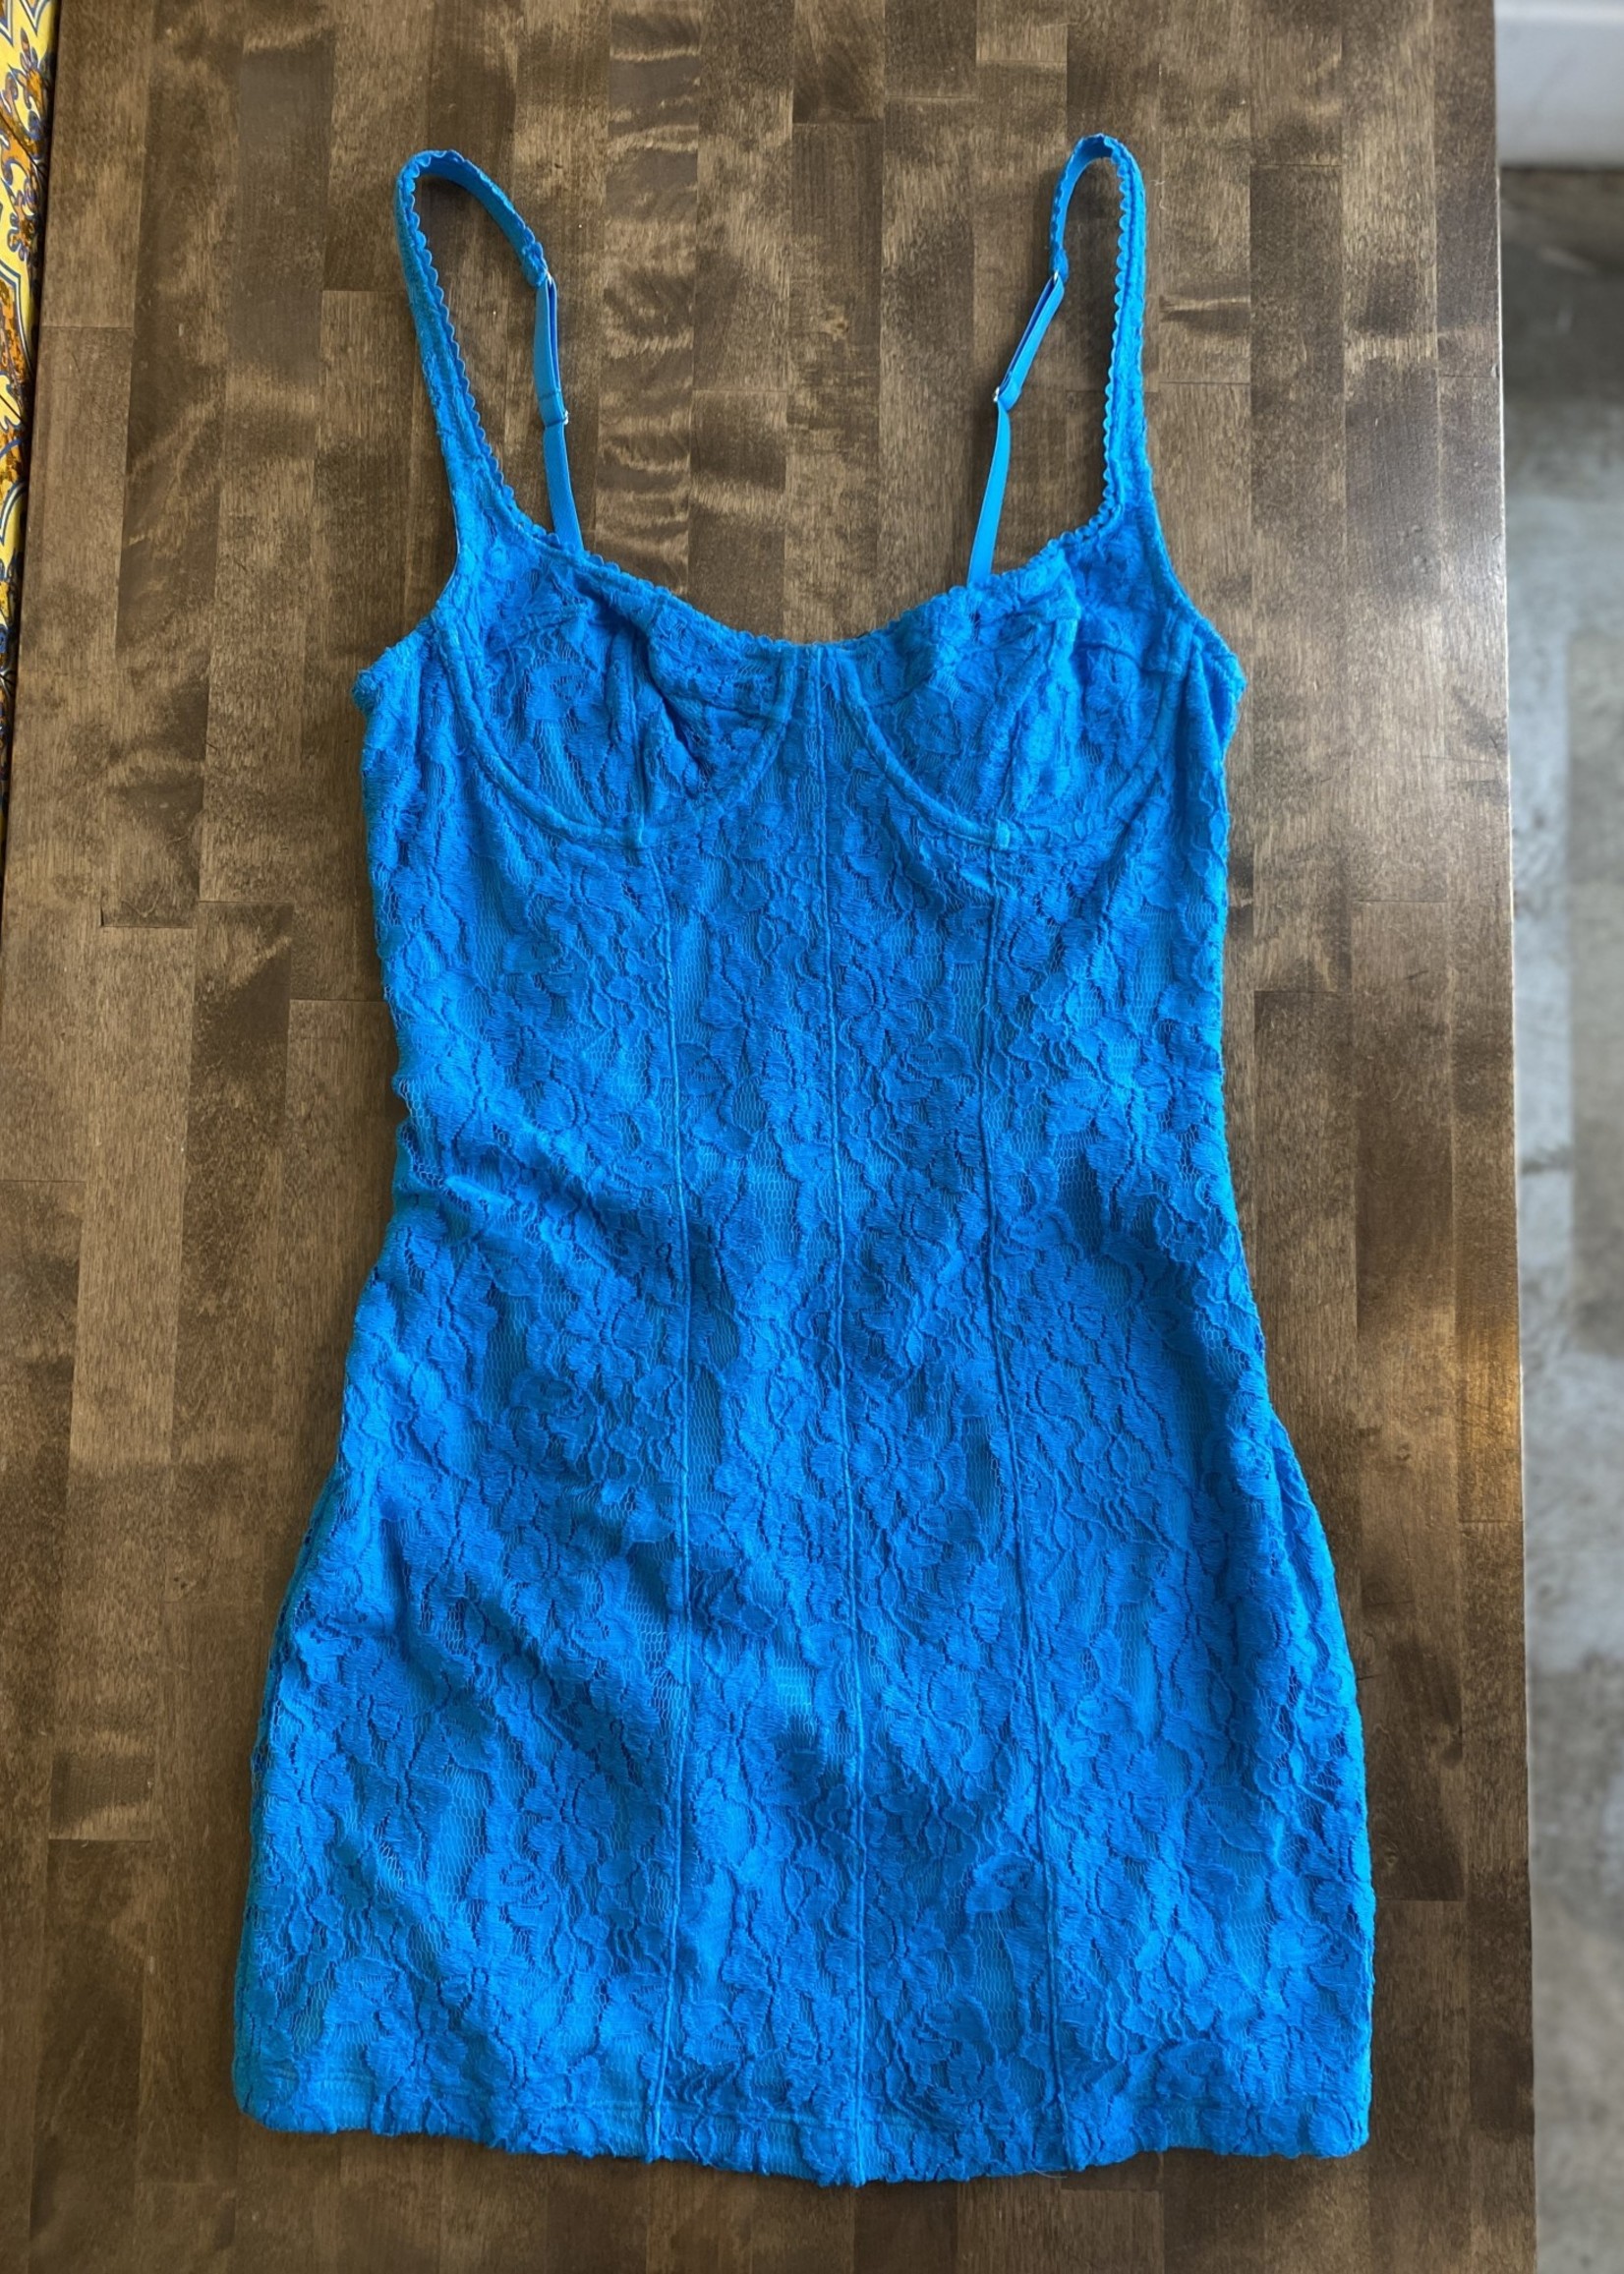 NWT Urban outfitters blue Lace flower dress L